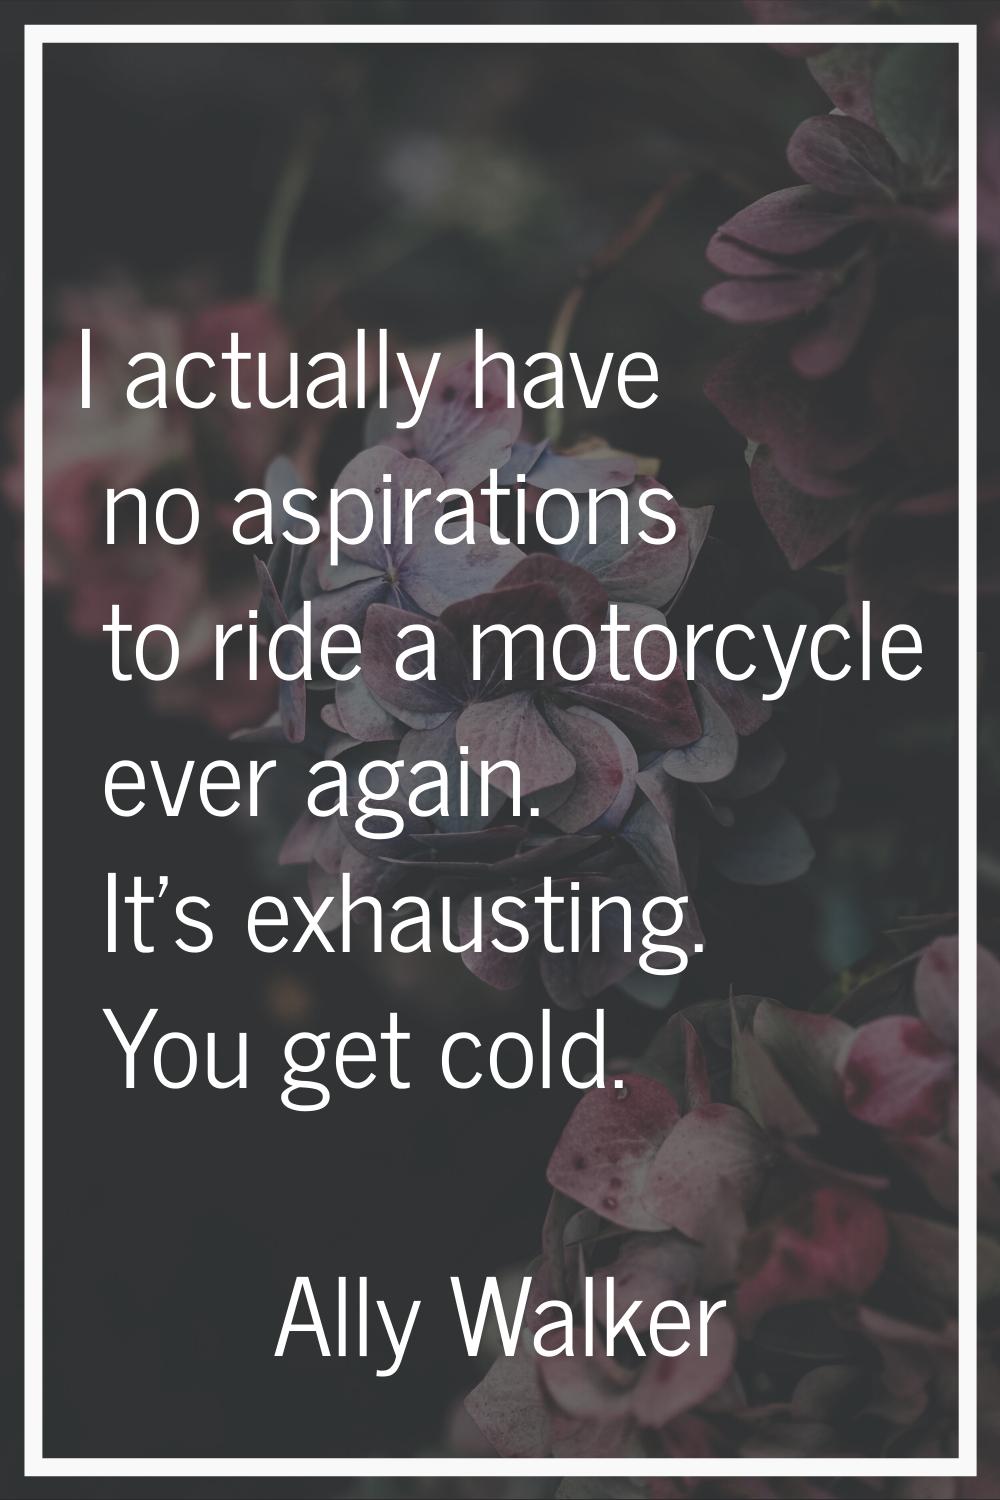 I actually have no aspirations to ride a motorcycle ever again. It's exhausting. You get cold.